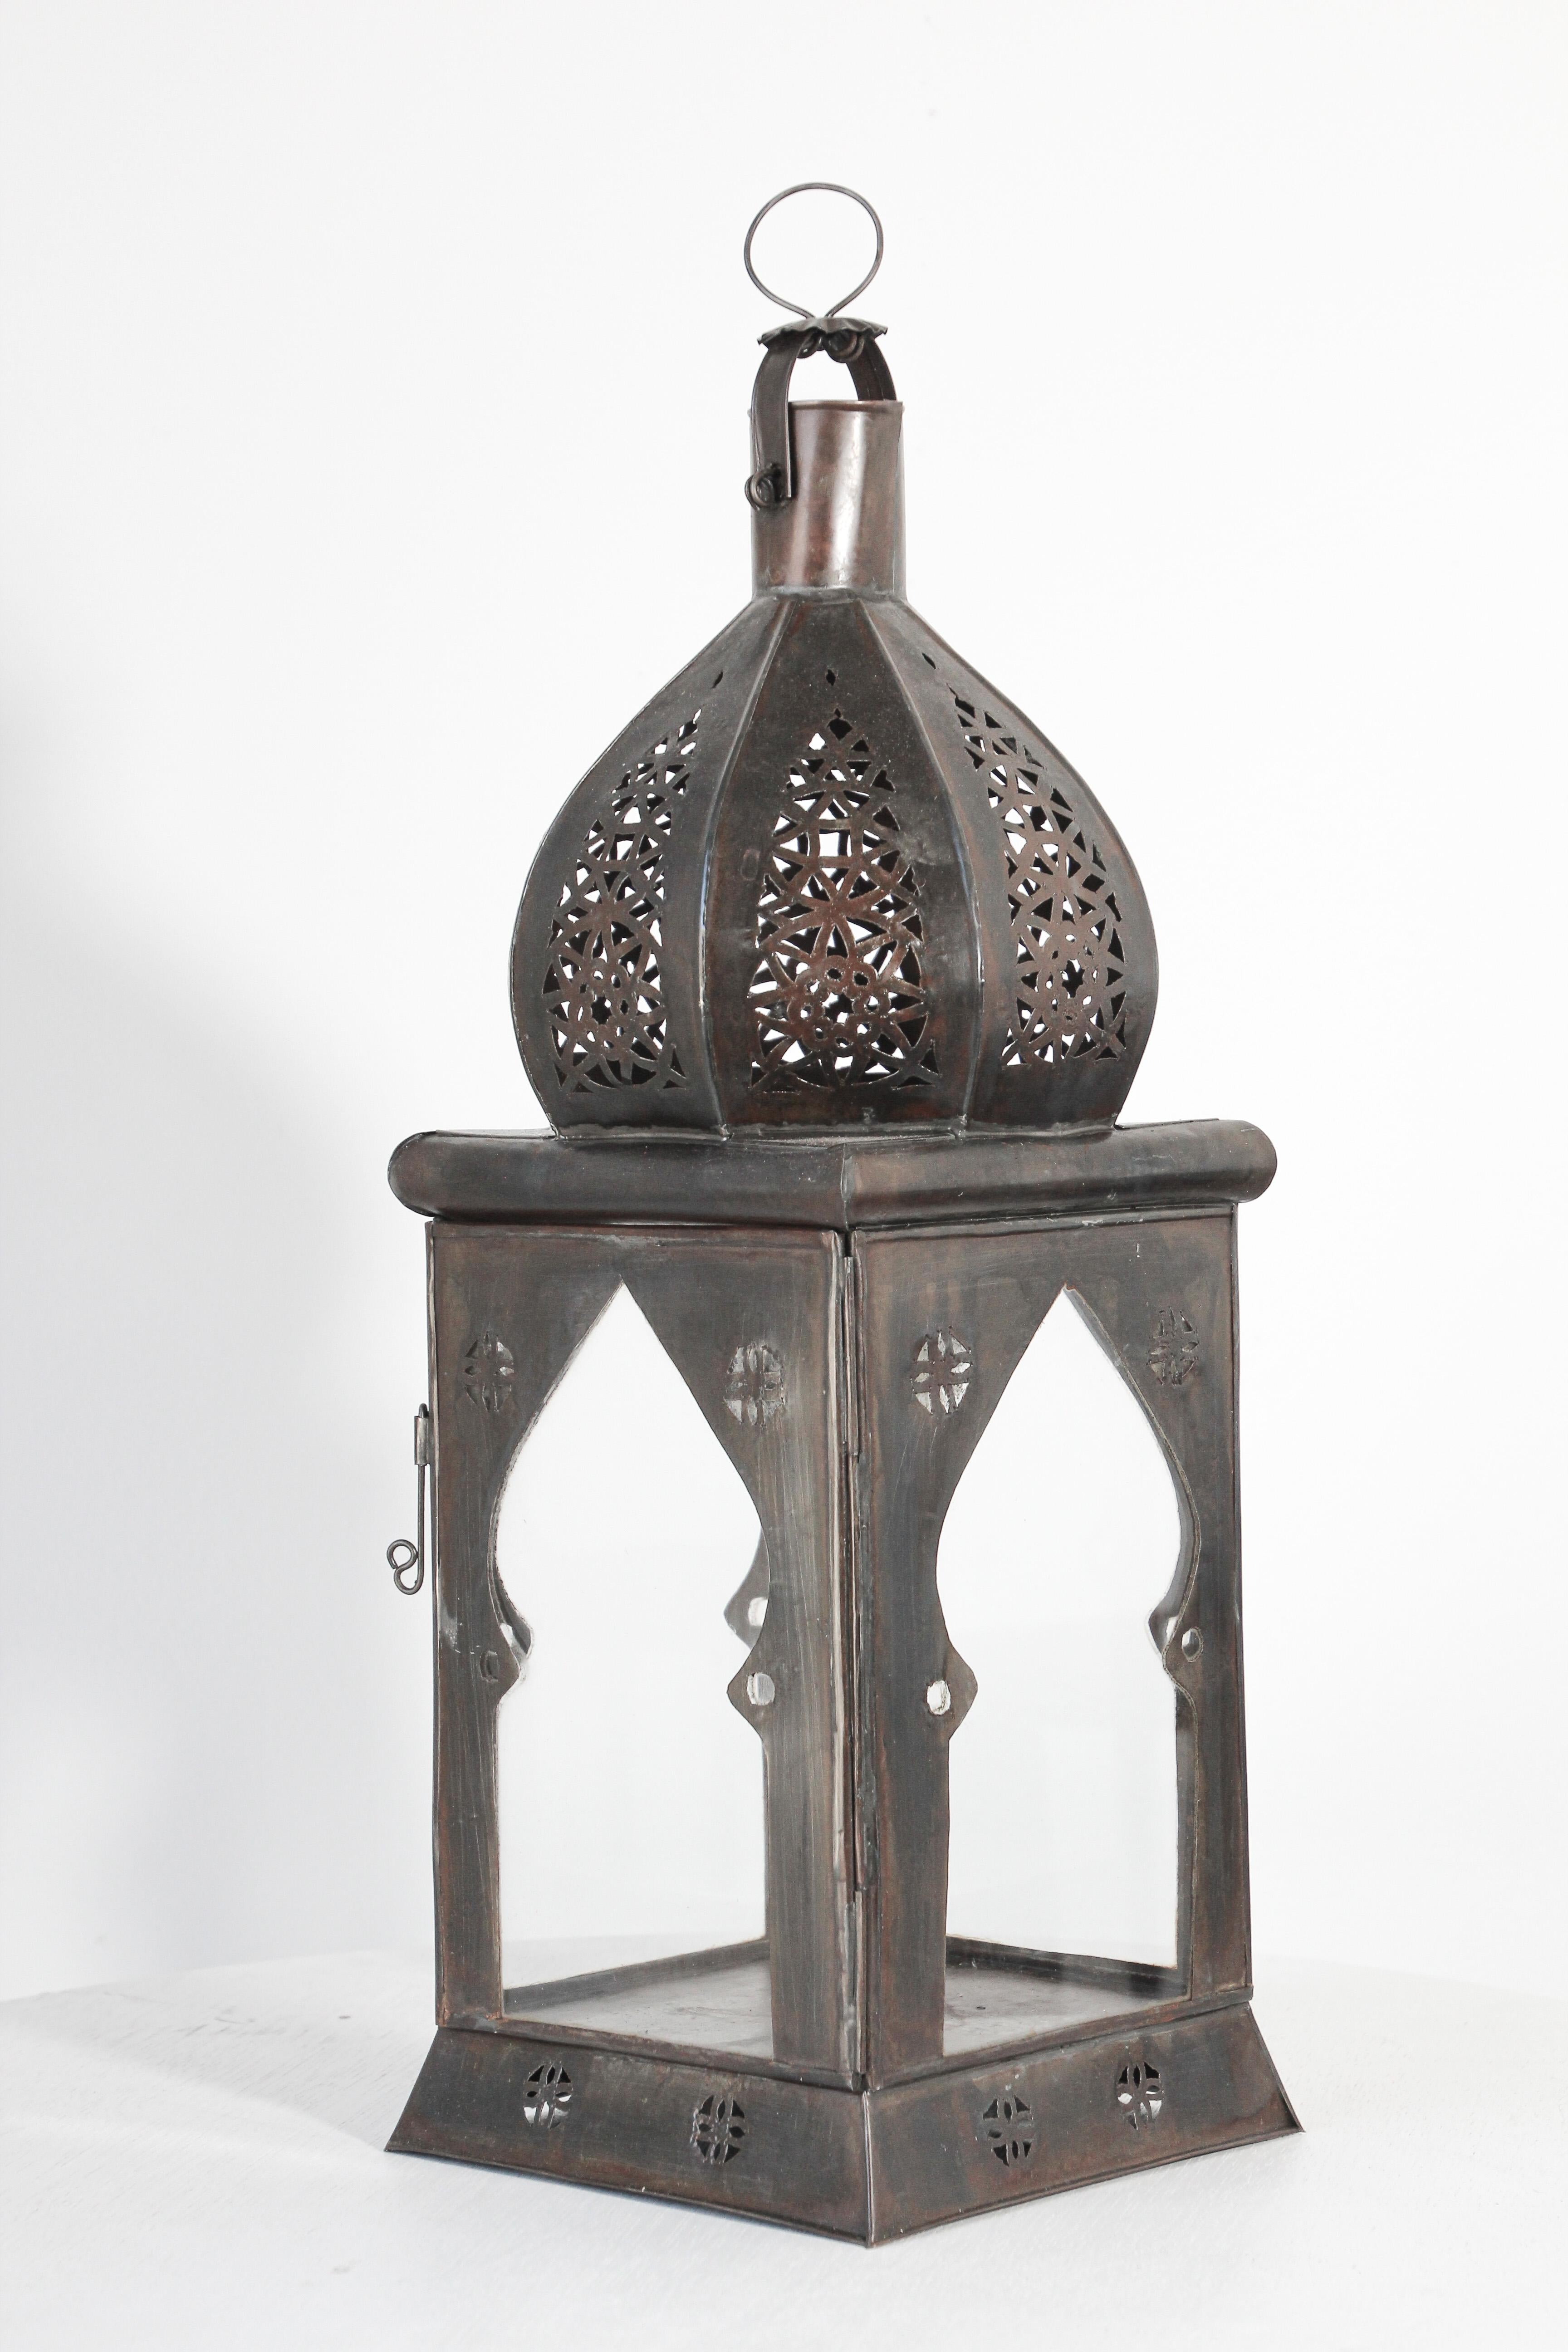 large Handcrafted Moroccan clear glass lantern adorned with open tole metal work Moorish filigree design.
Hurricane candle lamp with open metal work design and clear glass.
There is a small door to access the inside.
It's a perfect choice, this is